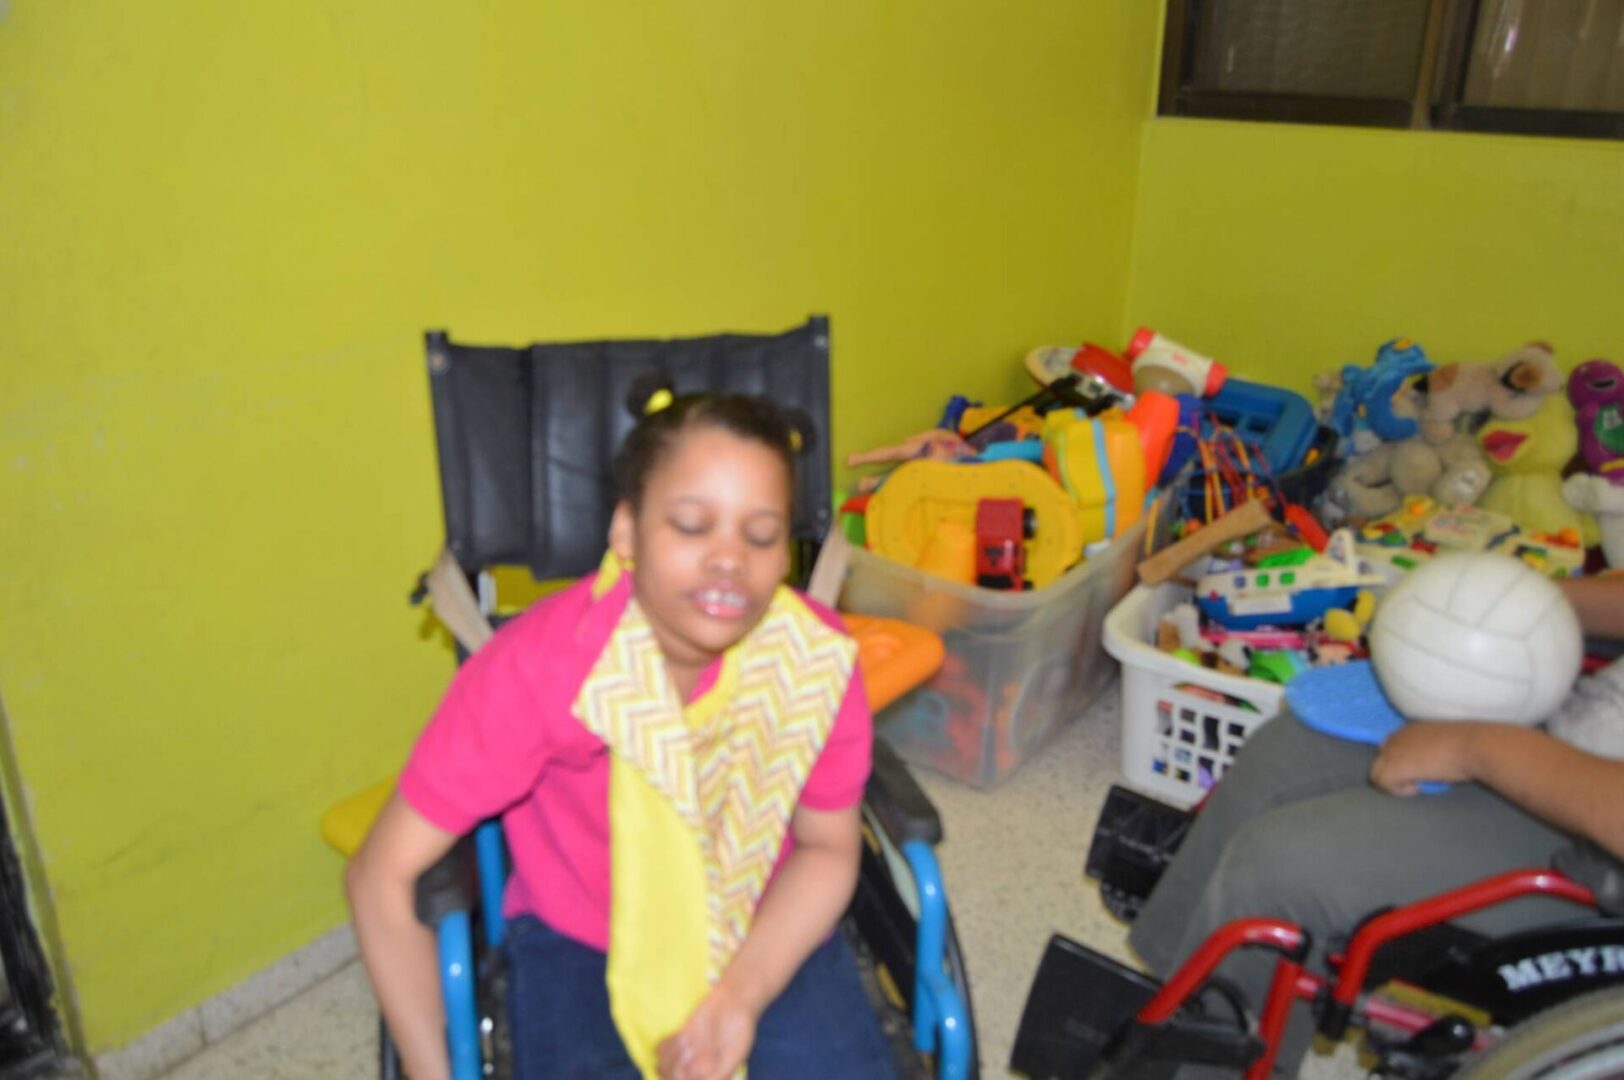 A girl in a wheelchair wearing a yellow zigzag cloth over a pink shirt